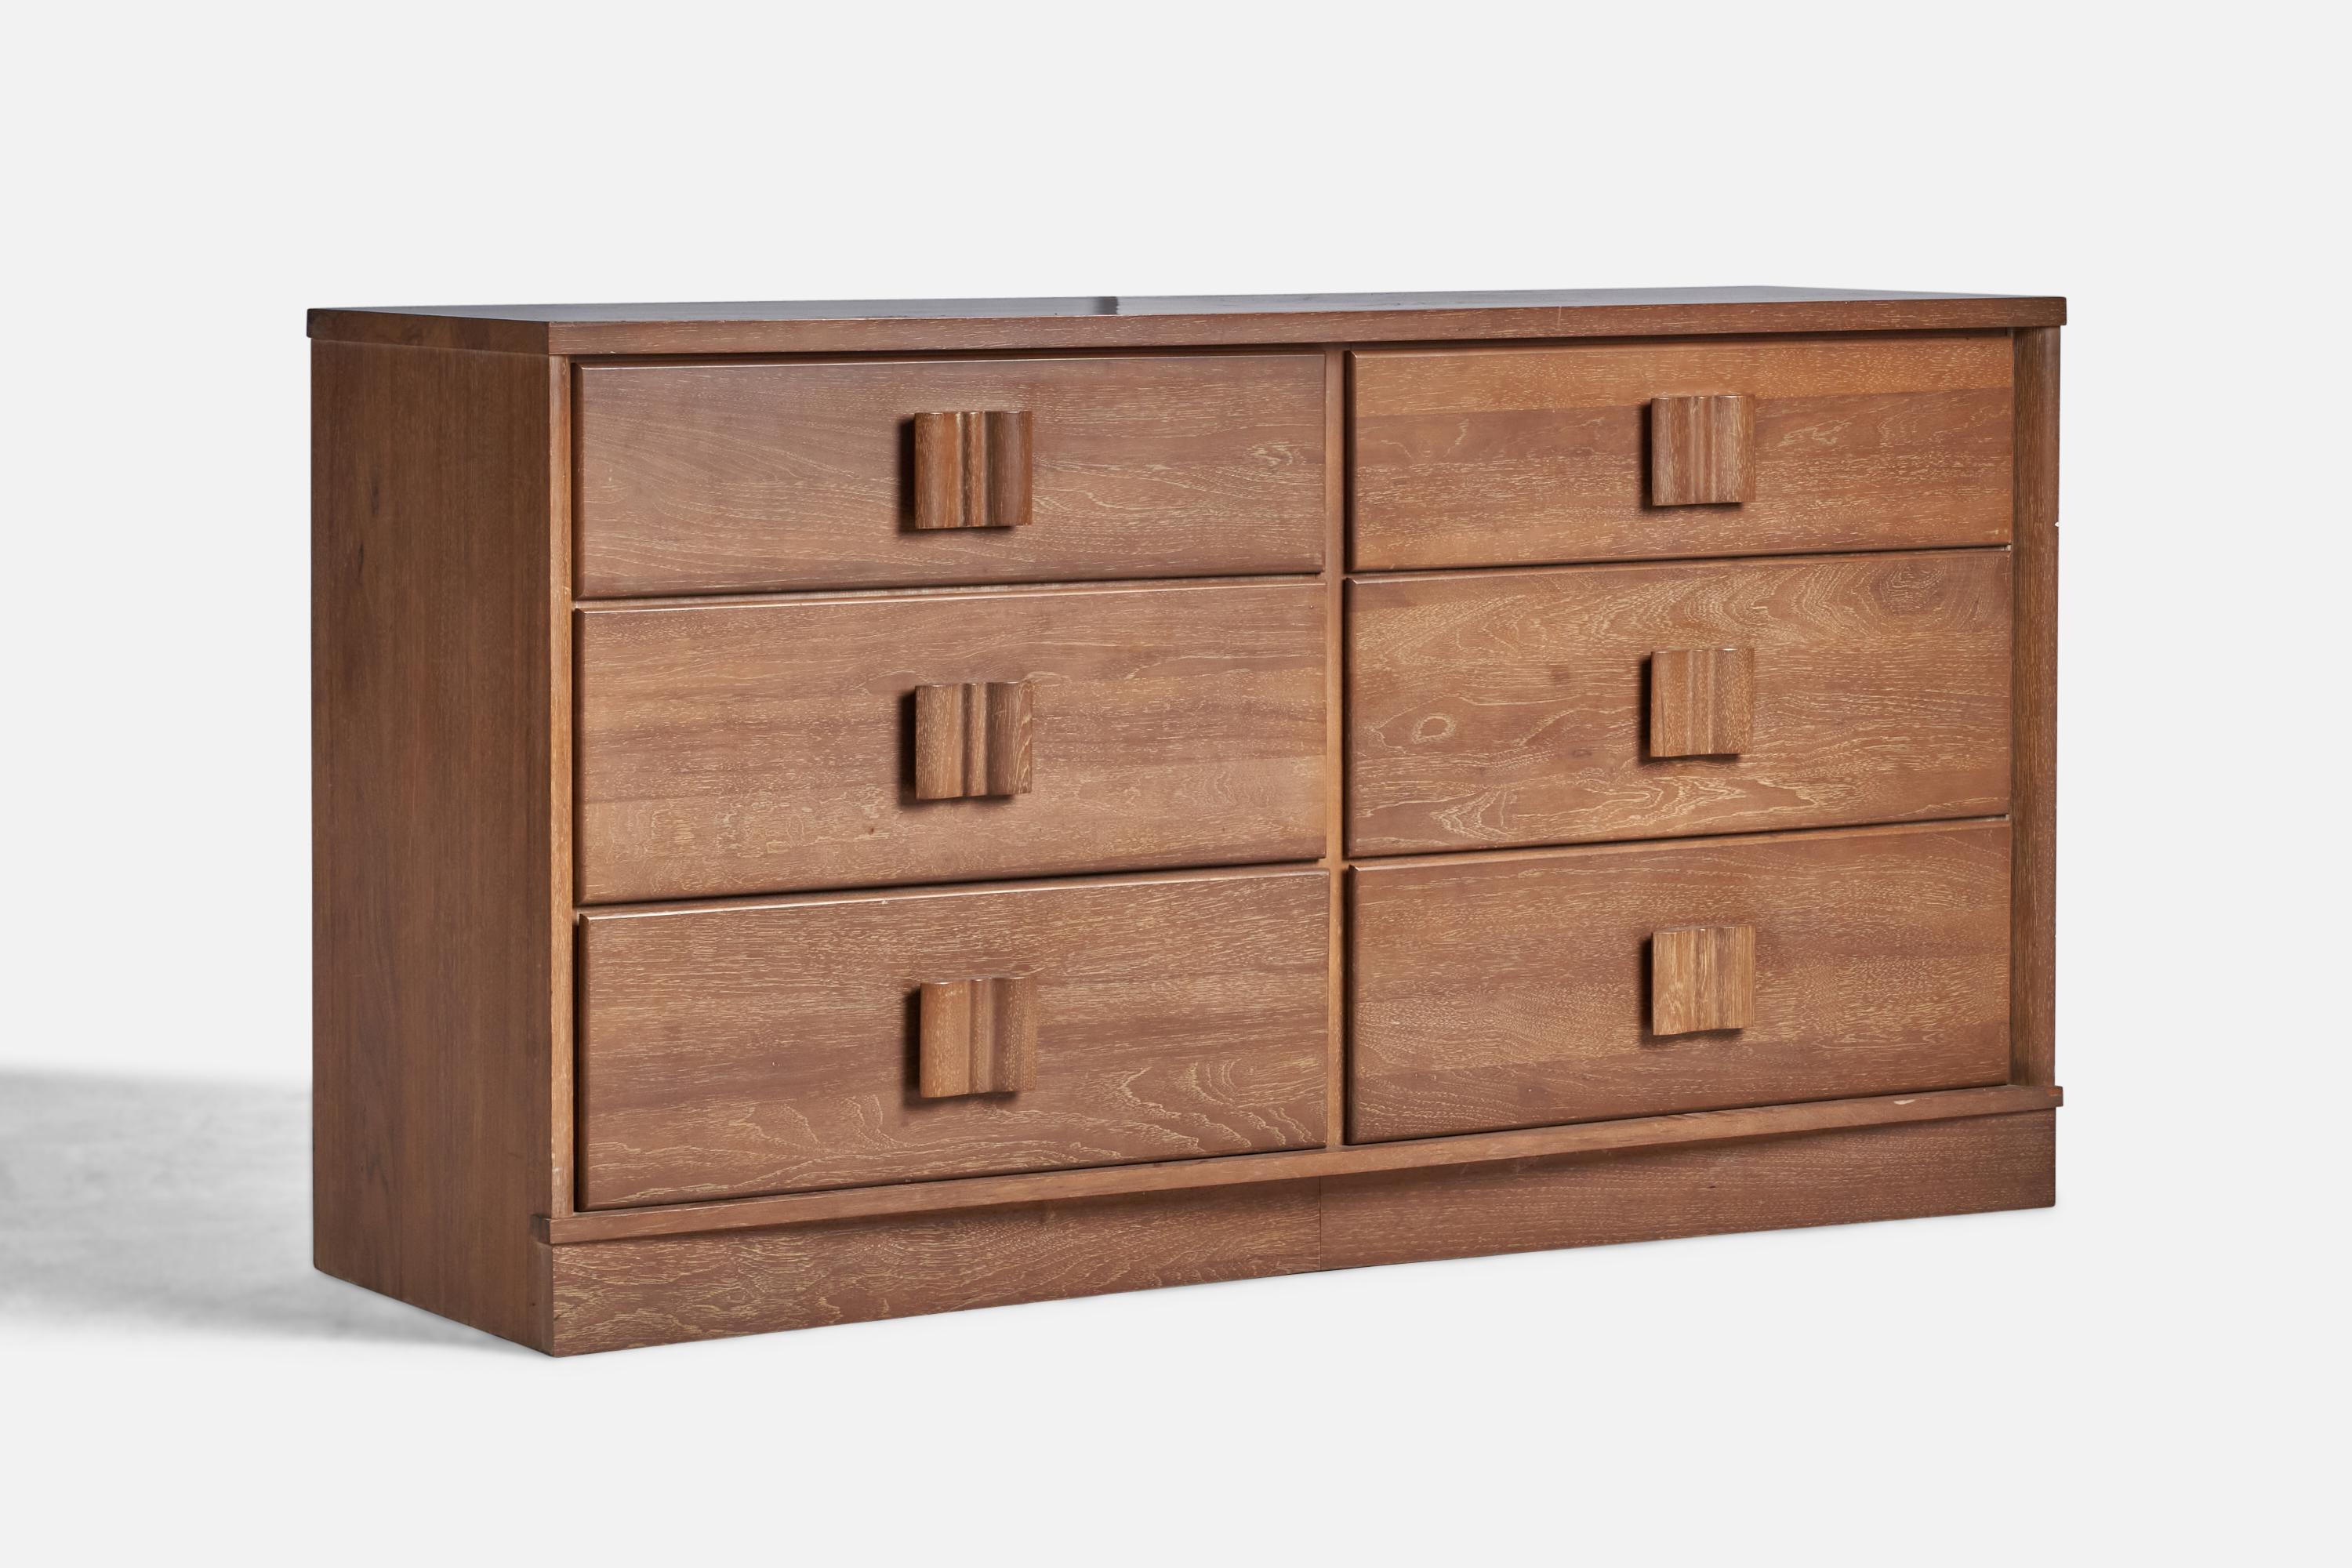 A stained oak dresser designed and produced in the US, 1940s.